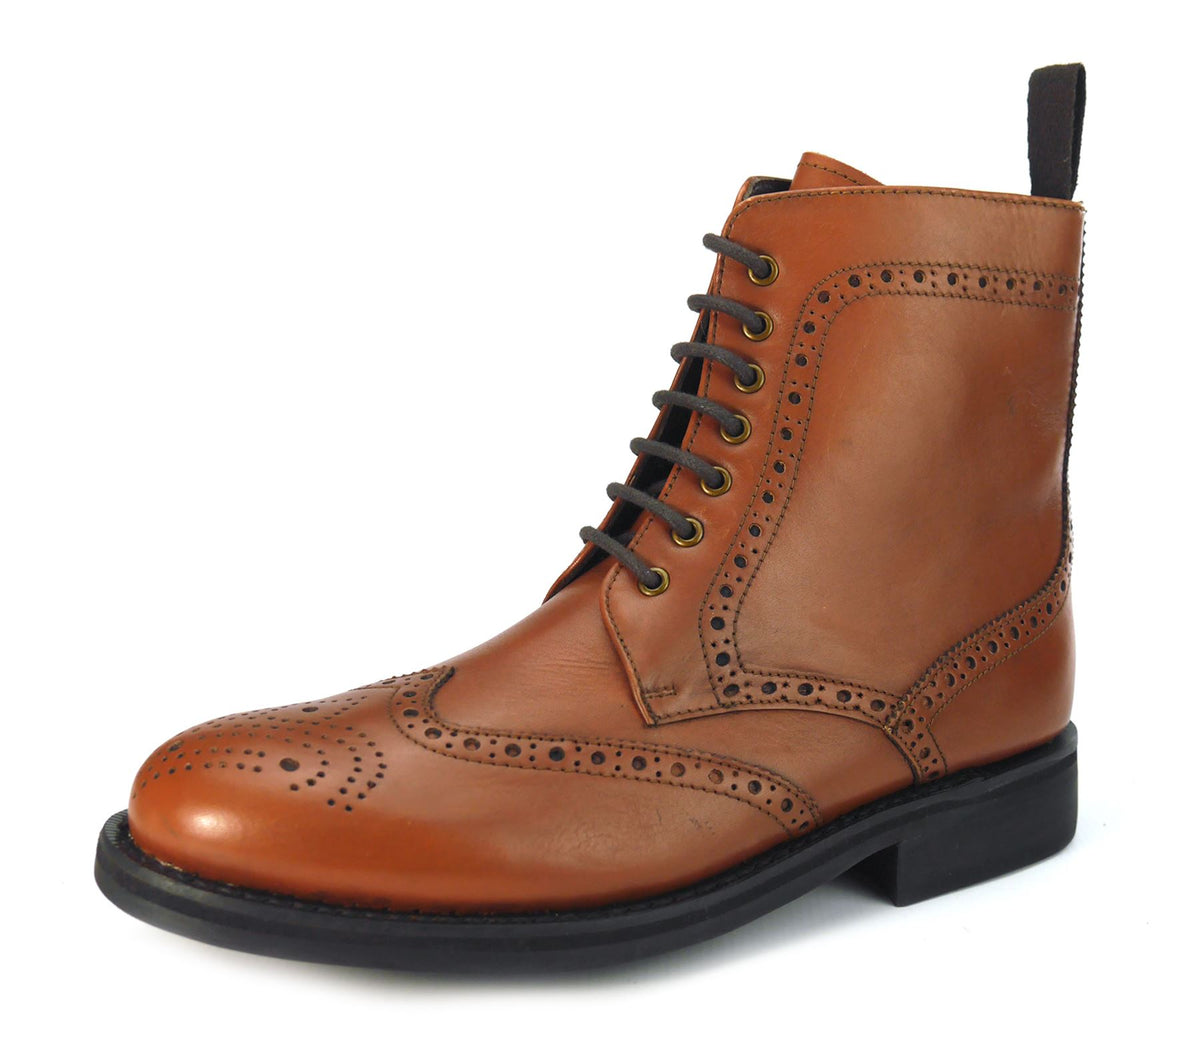 Frank James Benchgrade Cotswold Leather Welted Lace Up Brogue Dealer Boots